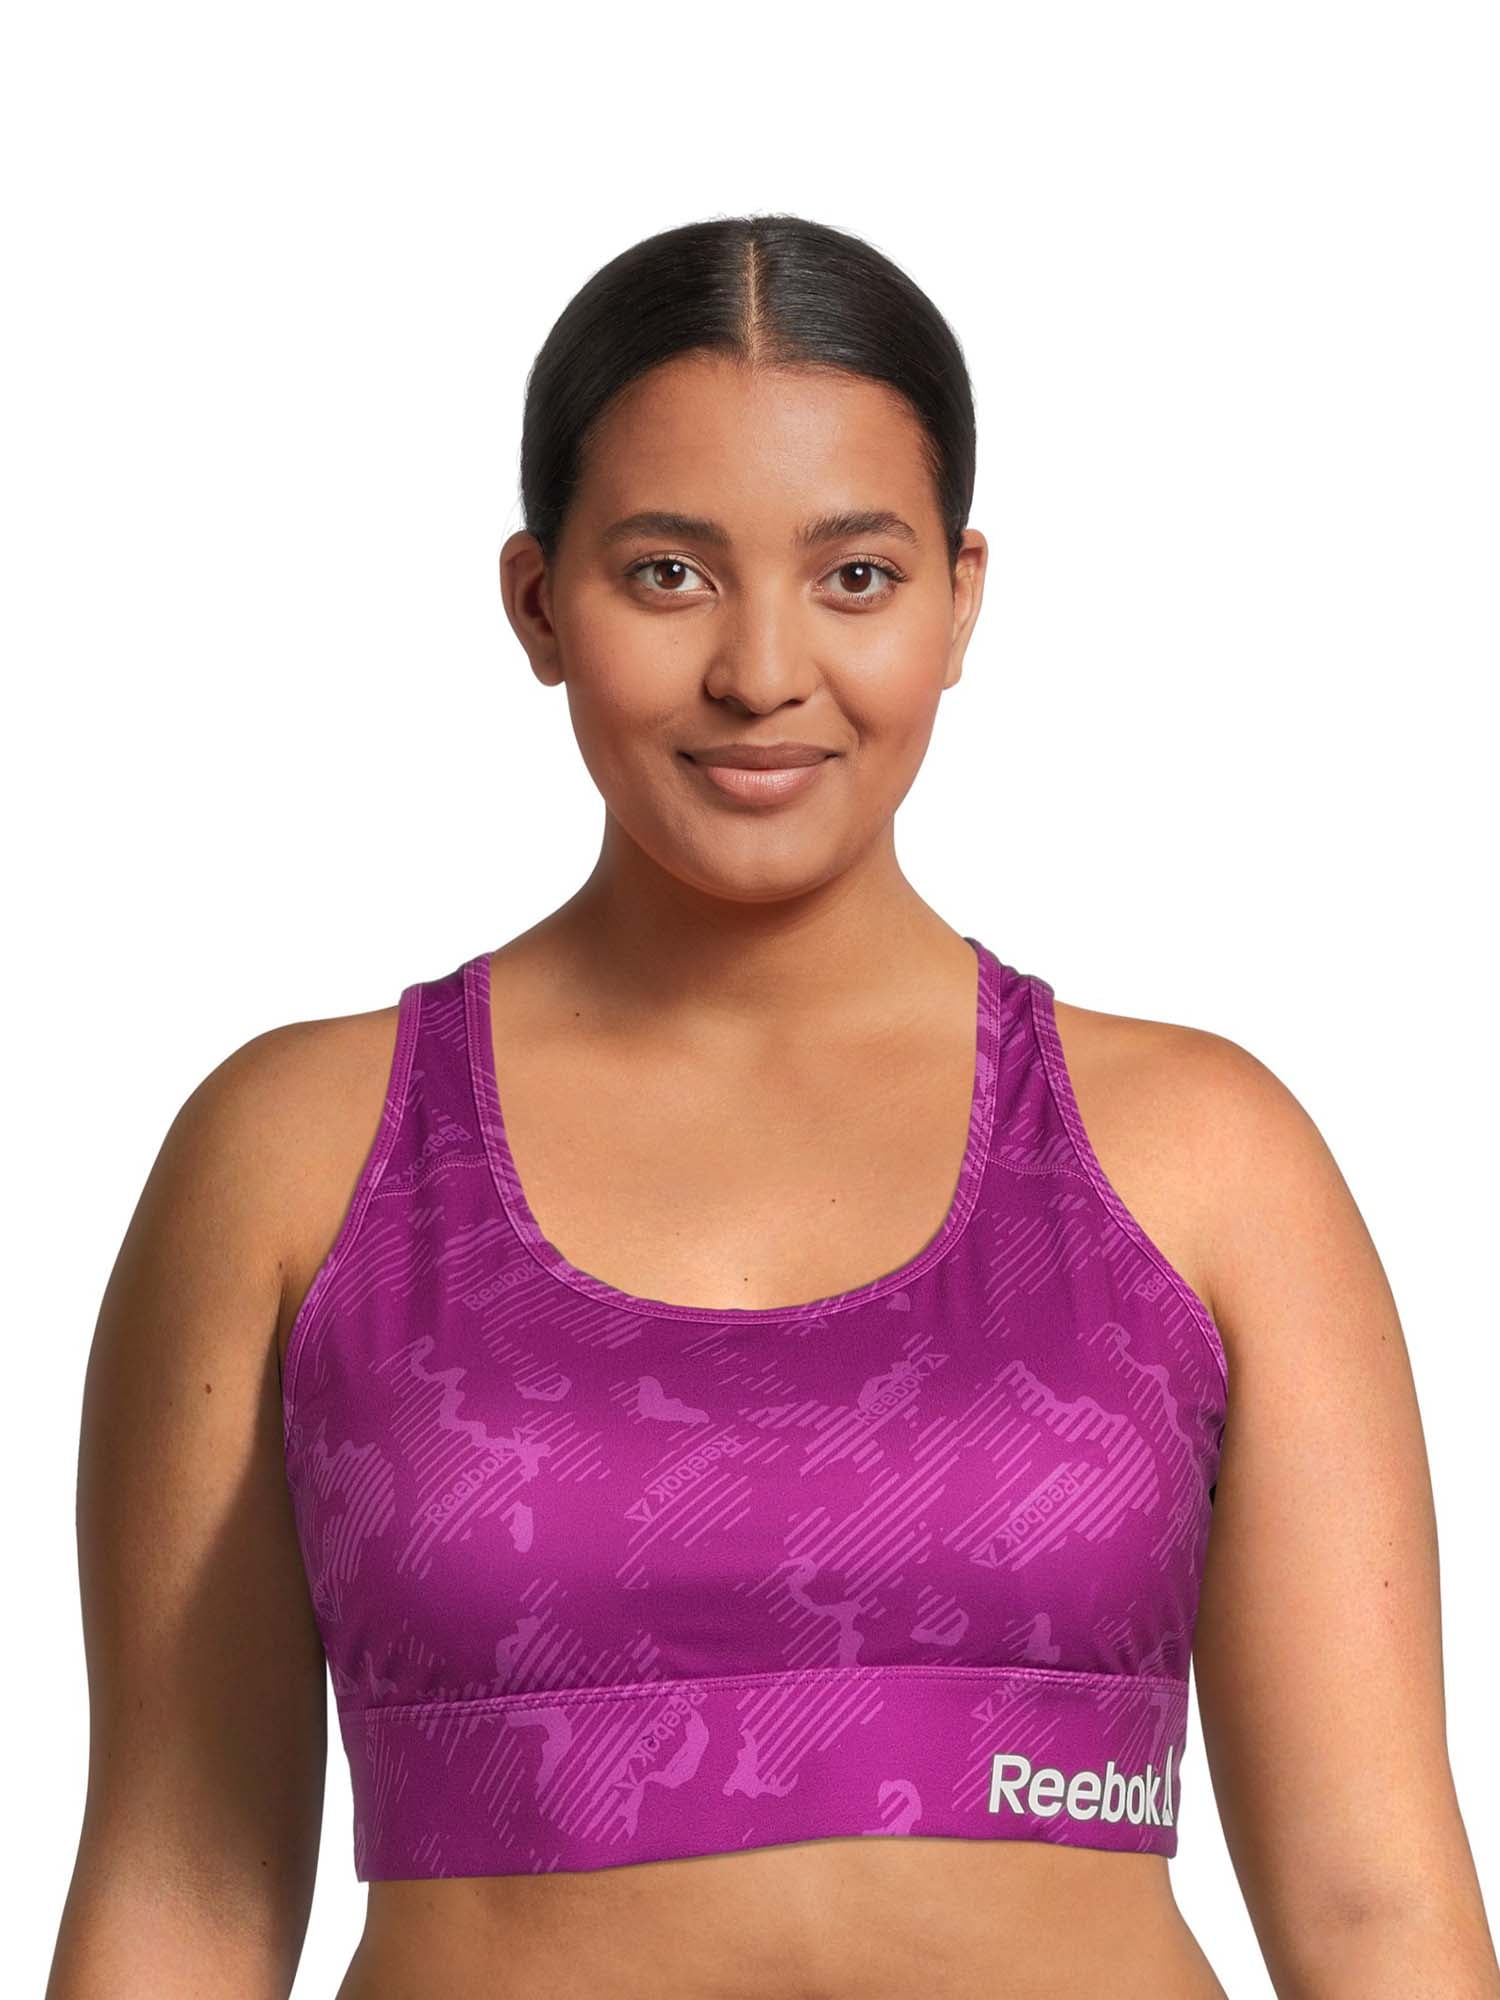 Reebok Women's Plus Size Medium Impact Getaway Bra with Pocket and  Removable Cups, Sizes 1X-4X